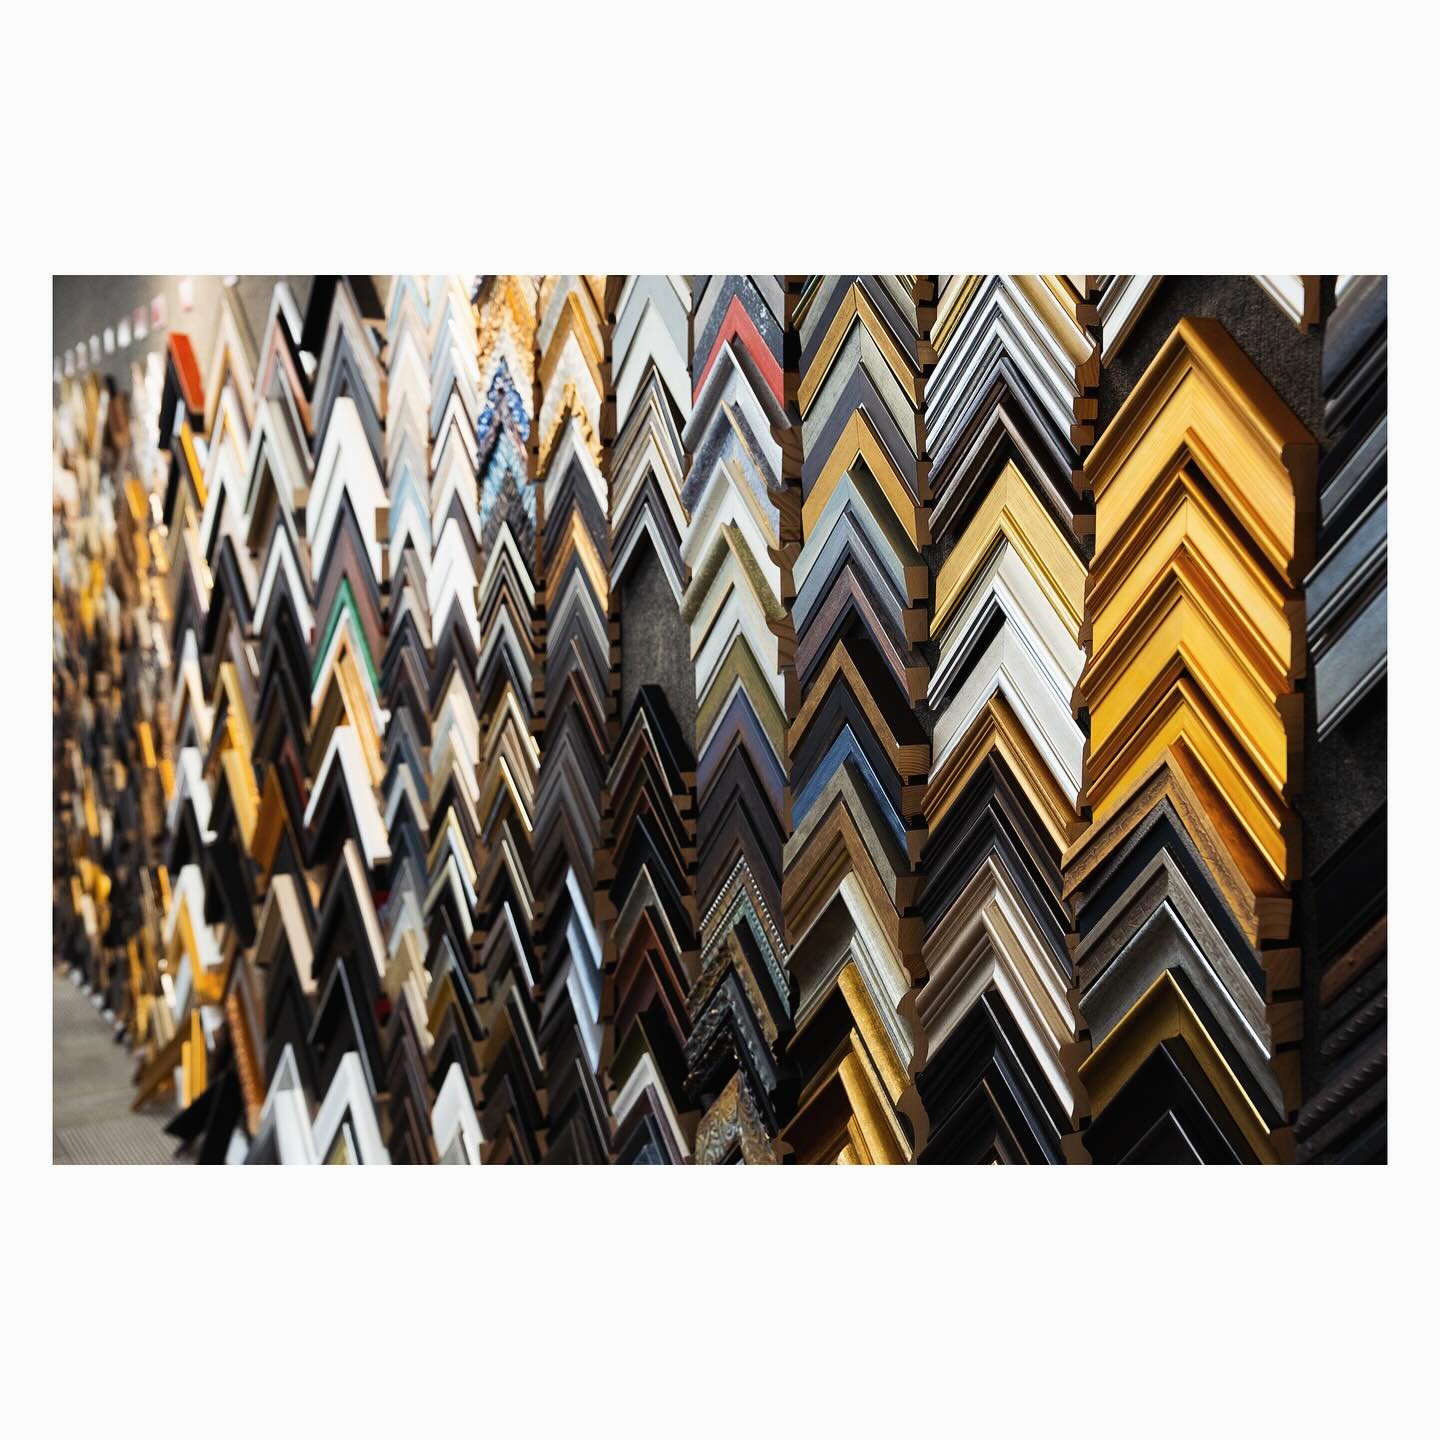 Happy Monday! ☀️☺️

It&rsquo;s a beautiful day to stop by and browse our custom frames. 
With nearly 3,000 frame samples in store, and thousands more available upon request, we have the most comprehensive framing wall around!

More importantly, our f